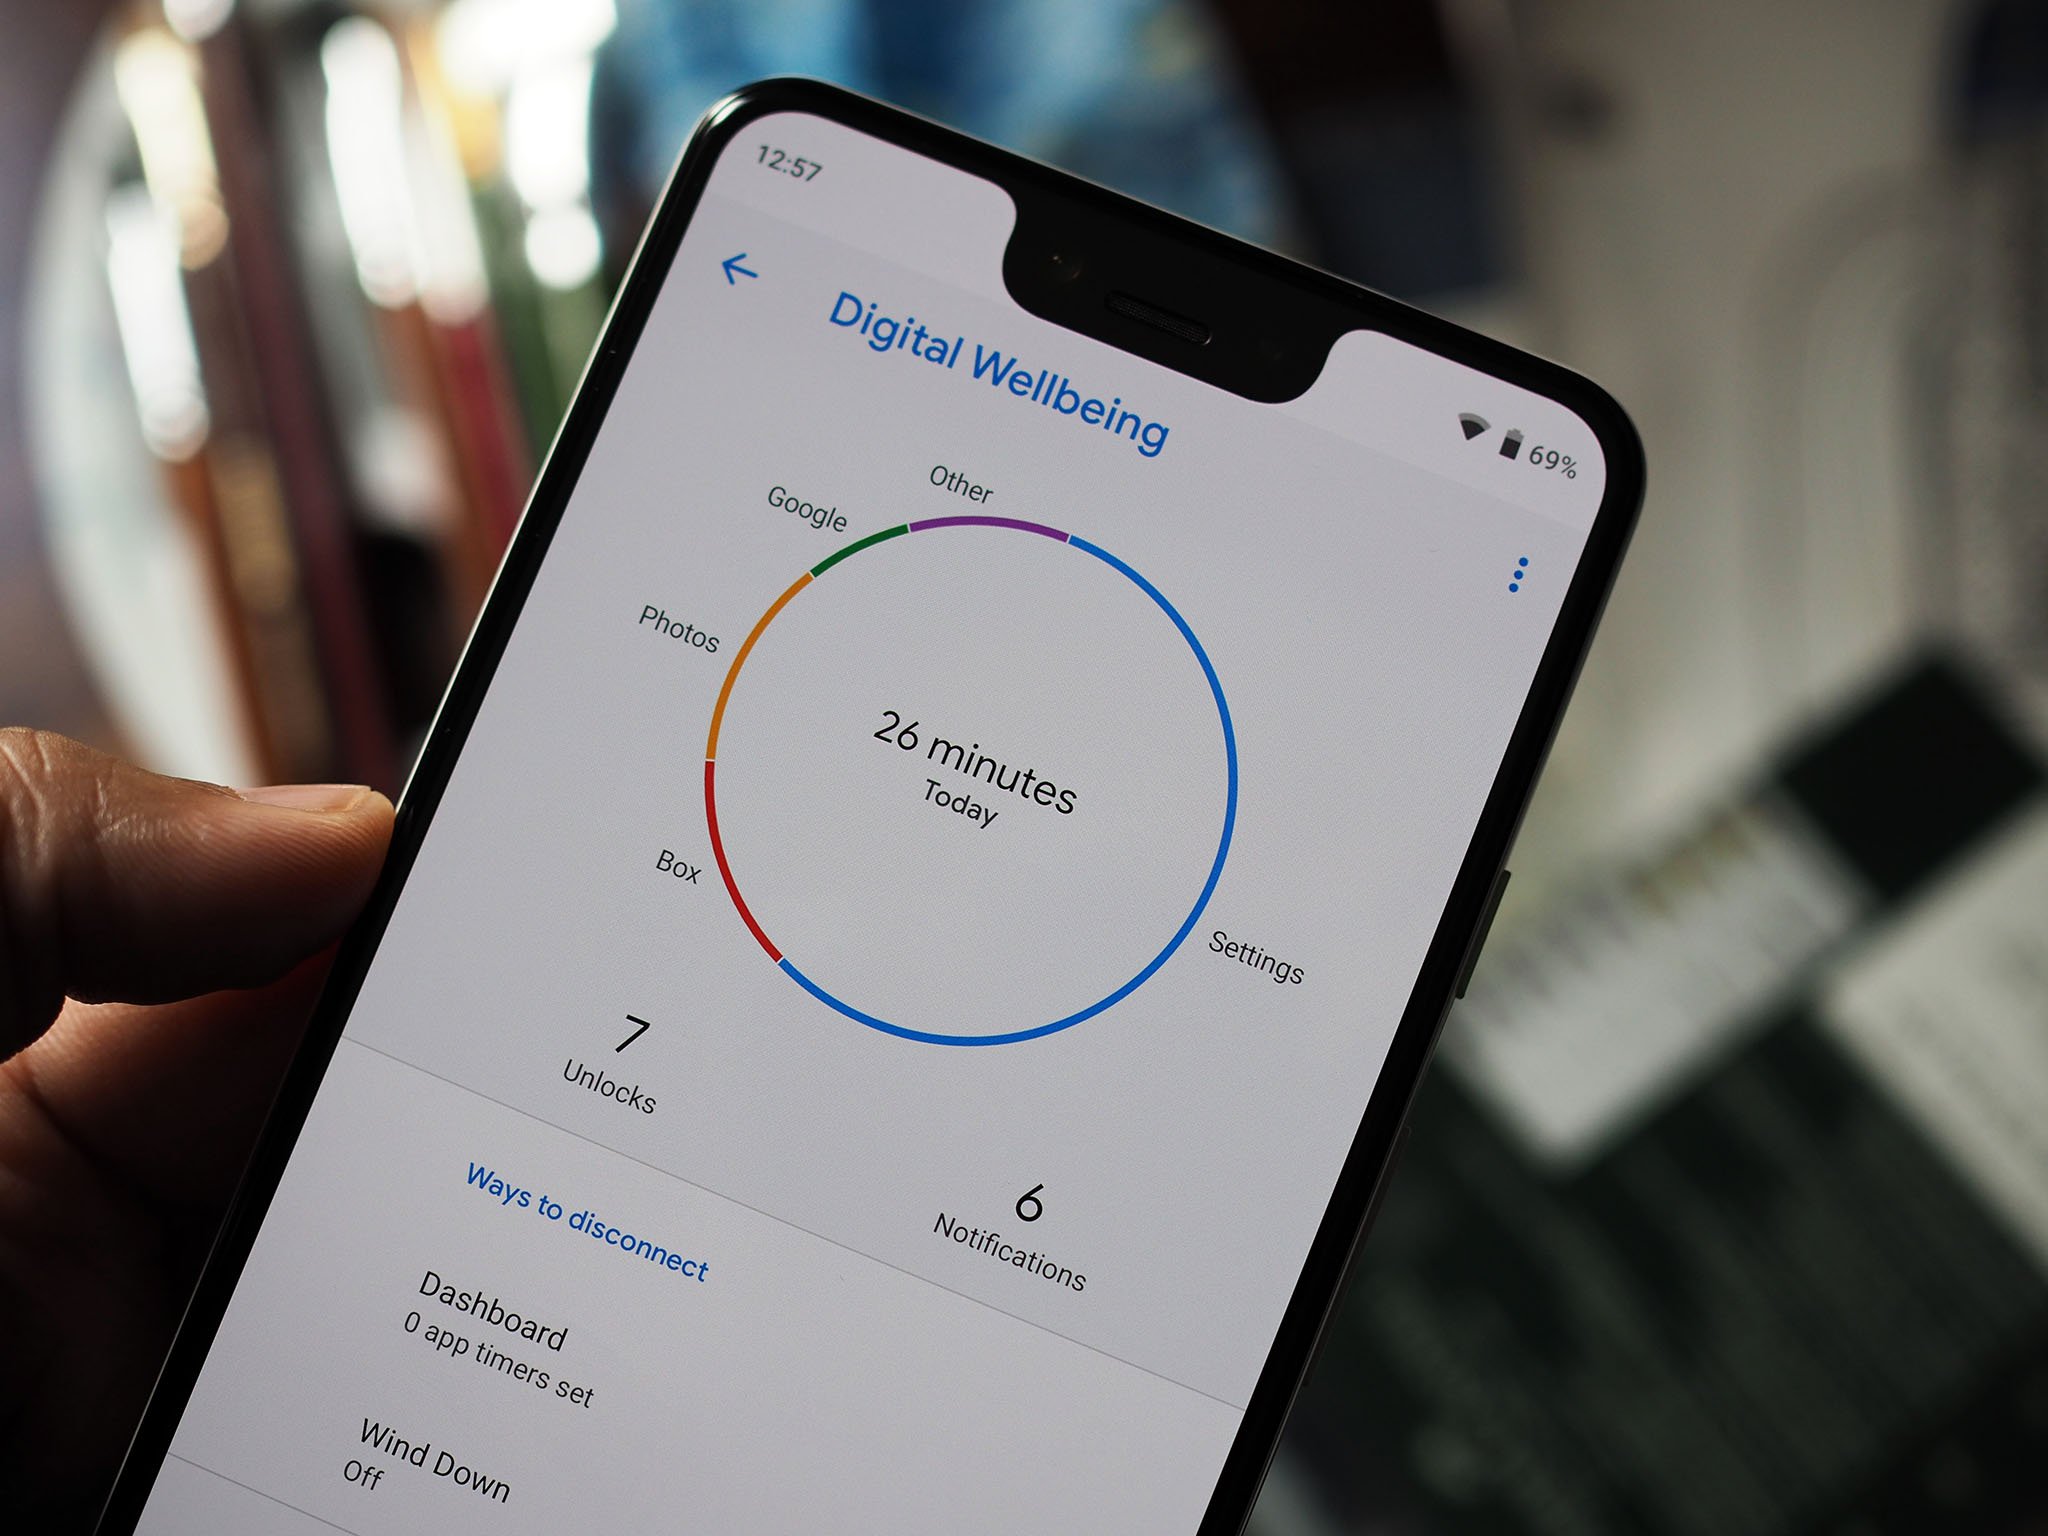 Turning off Digital Wellbeing might solve Pixel 3 and 3 XL performance issues